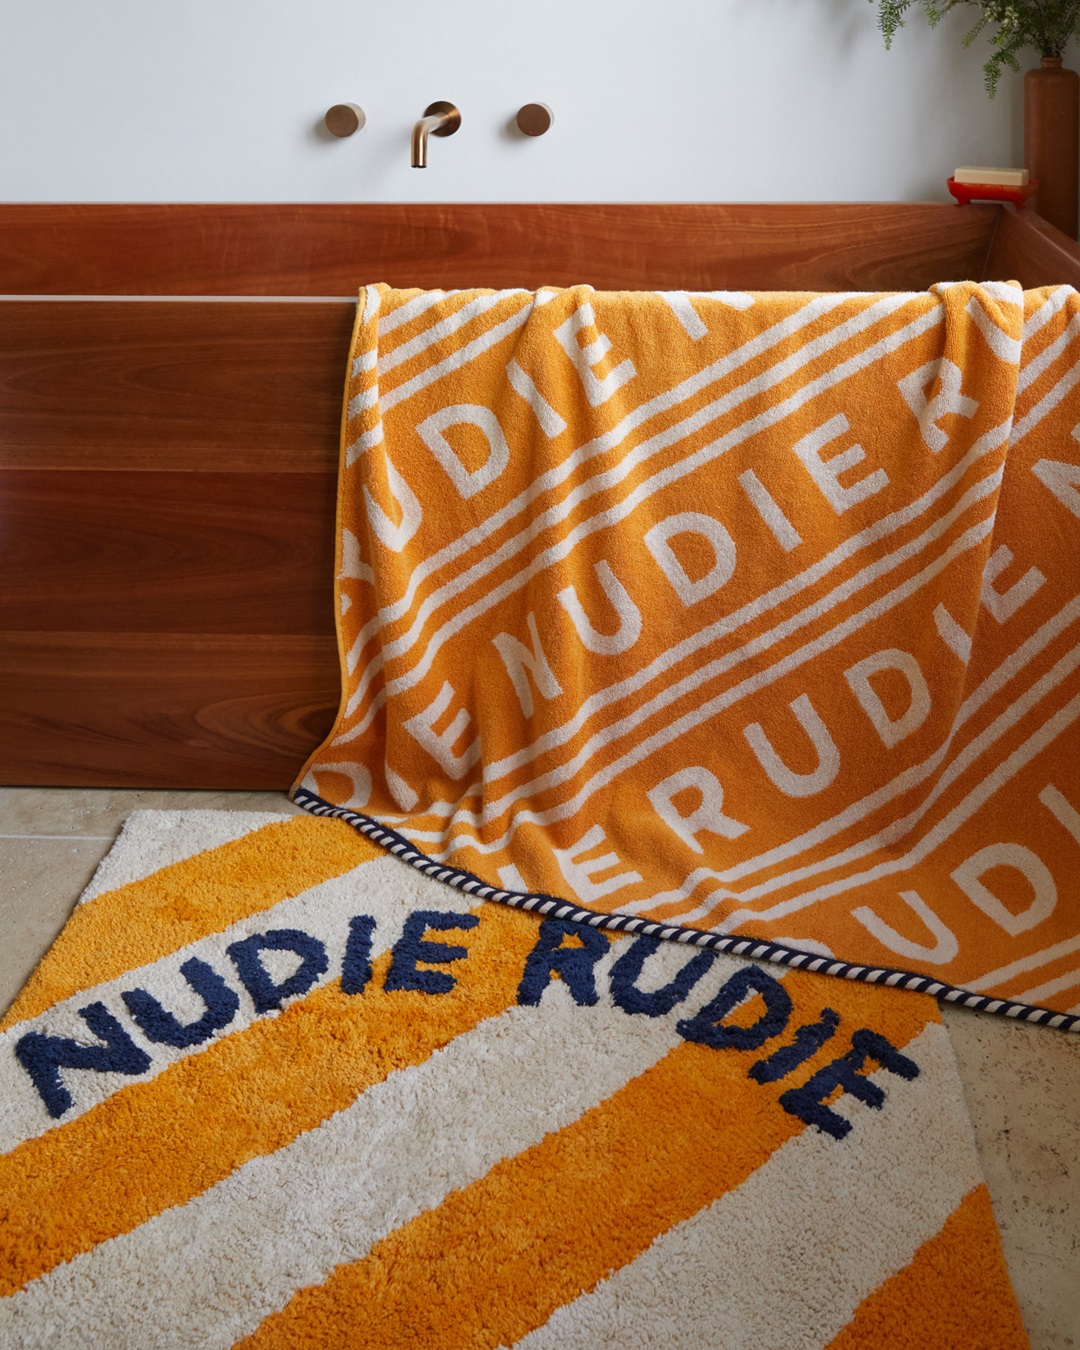 Gold and white stripe bath mat with Nudie Rudie on tiled floor